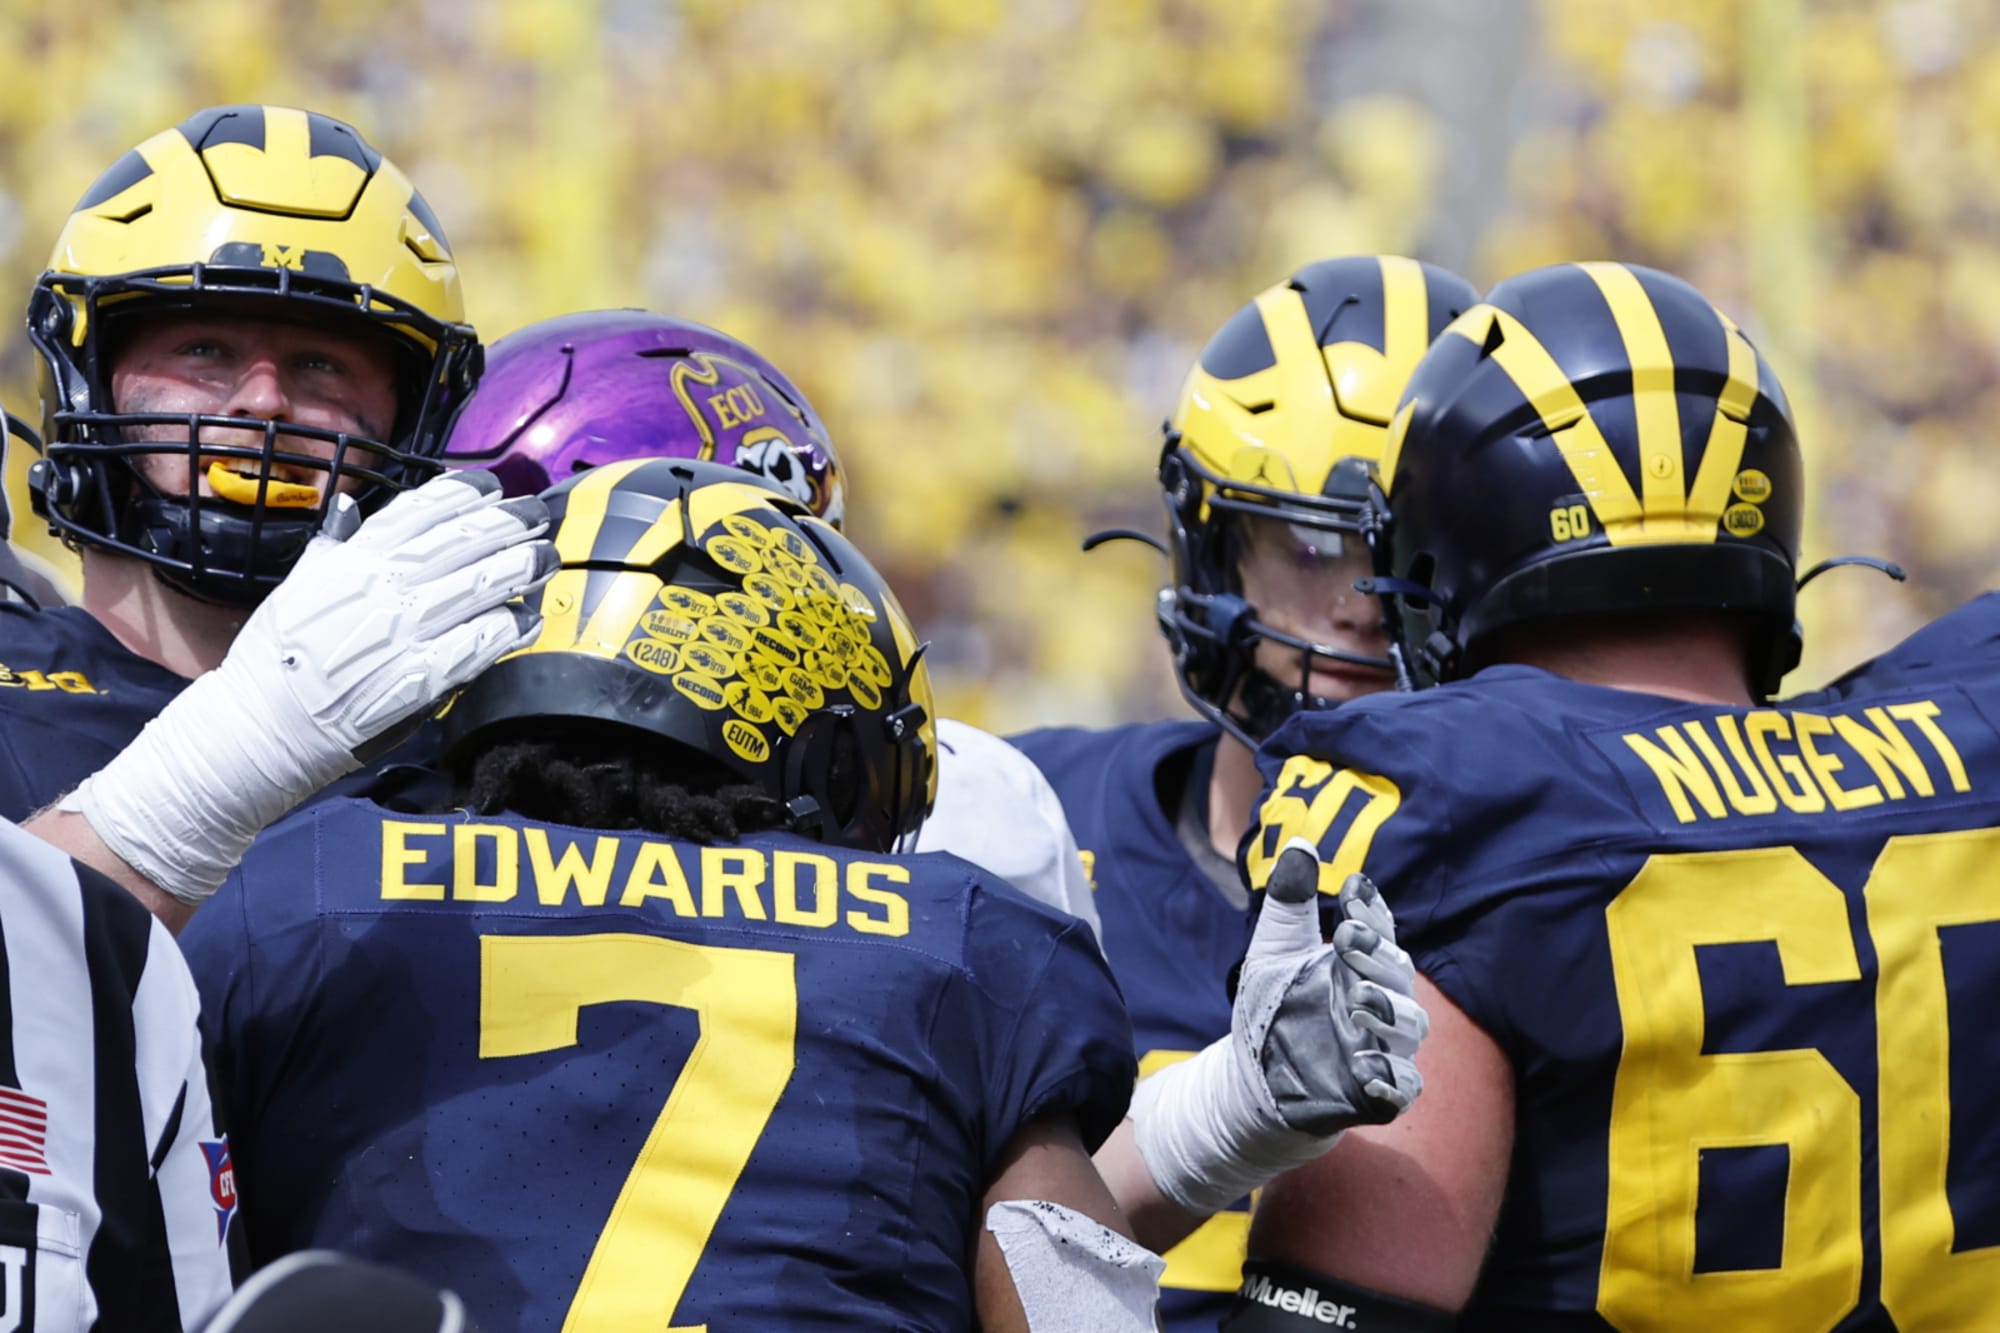 Opening odds revealed for Michigan vs. UNLV - Maize n Brew